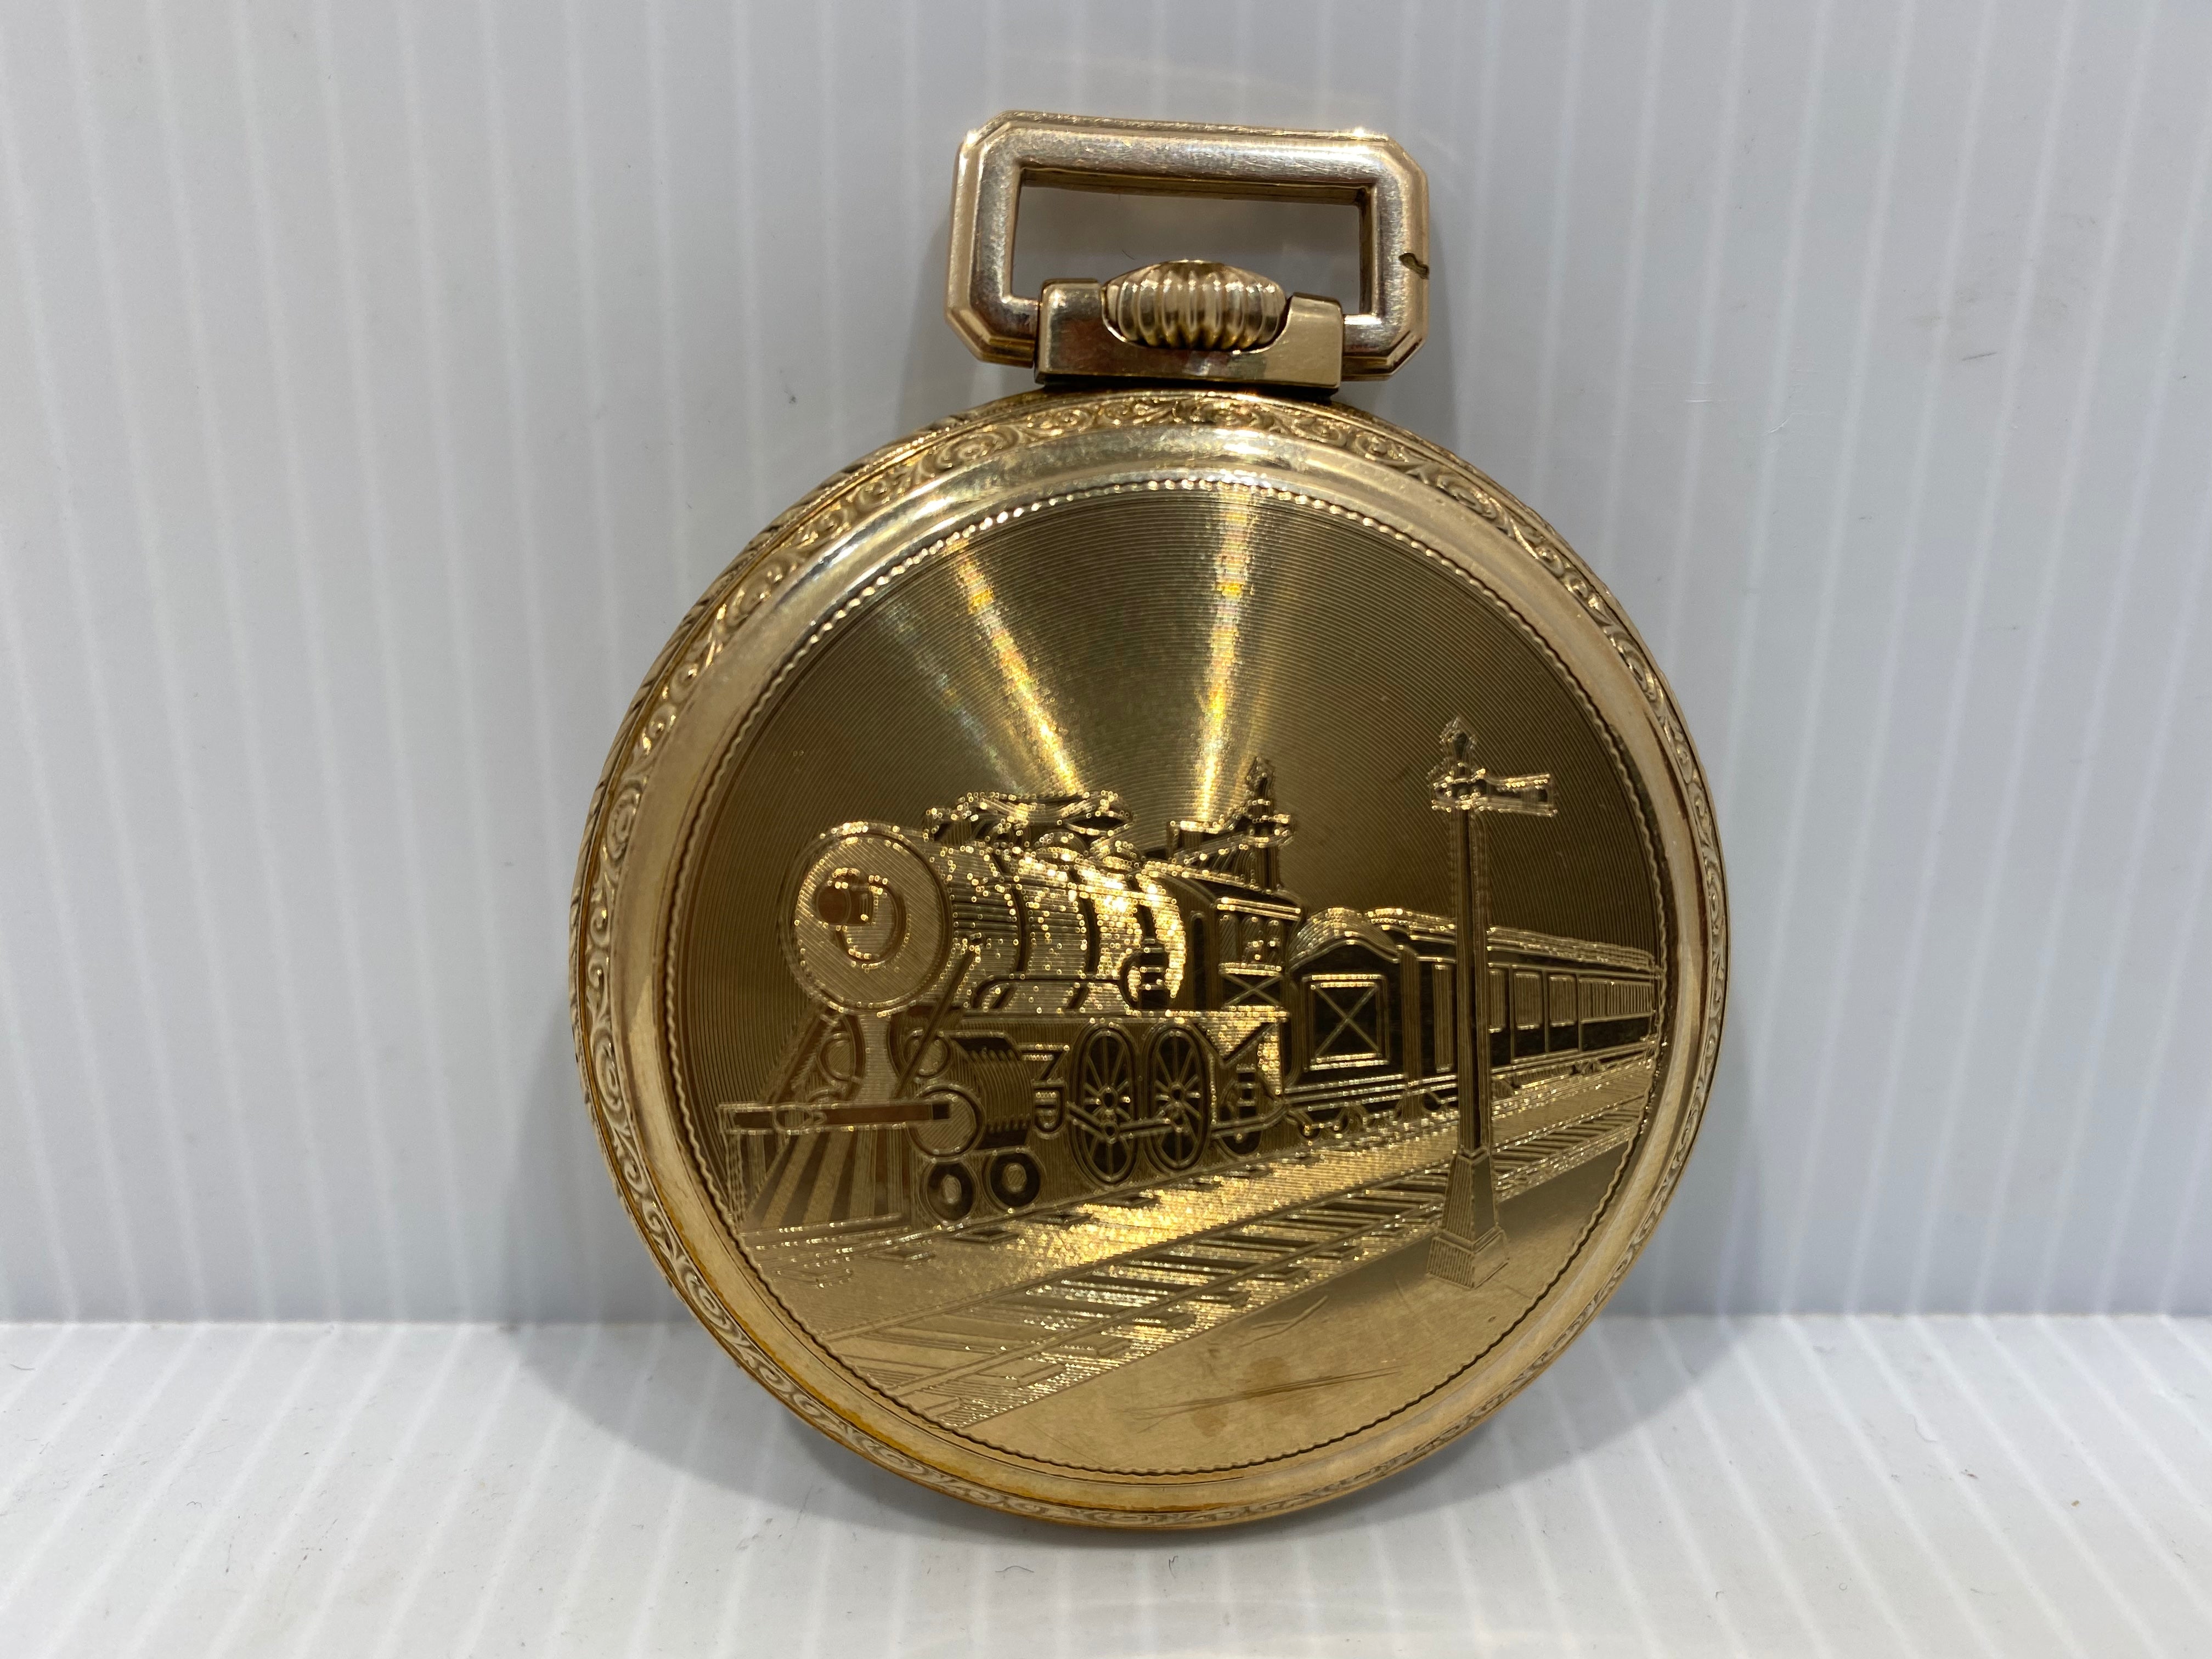 Elgin pocket watch gold plated, 1946